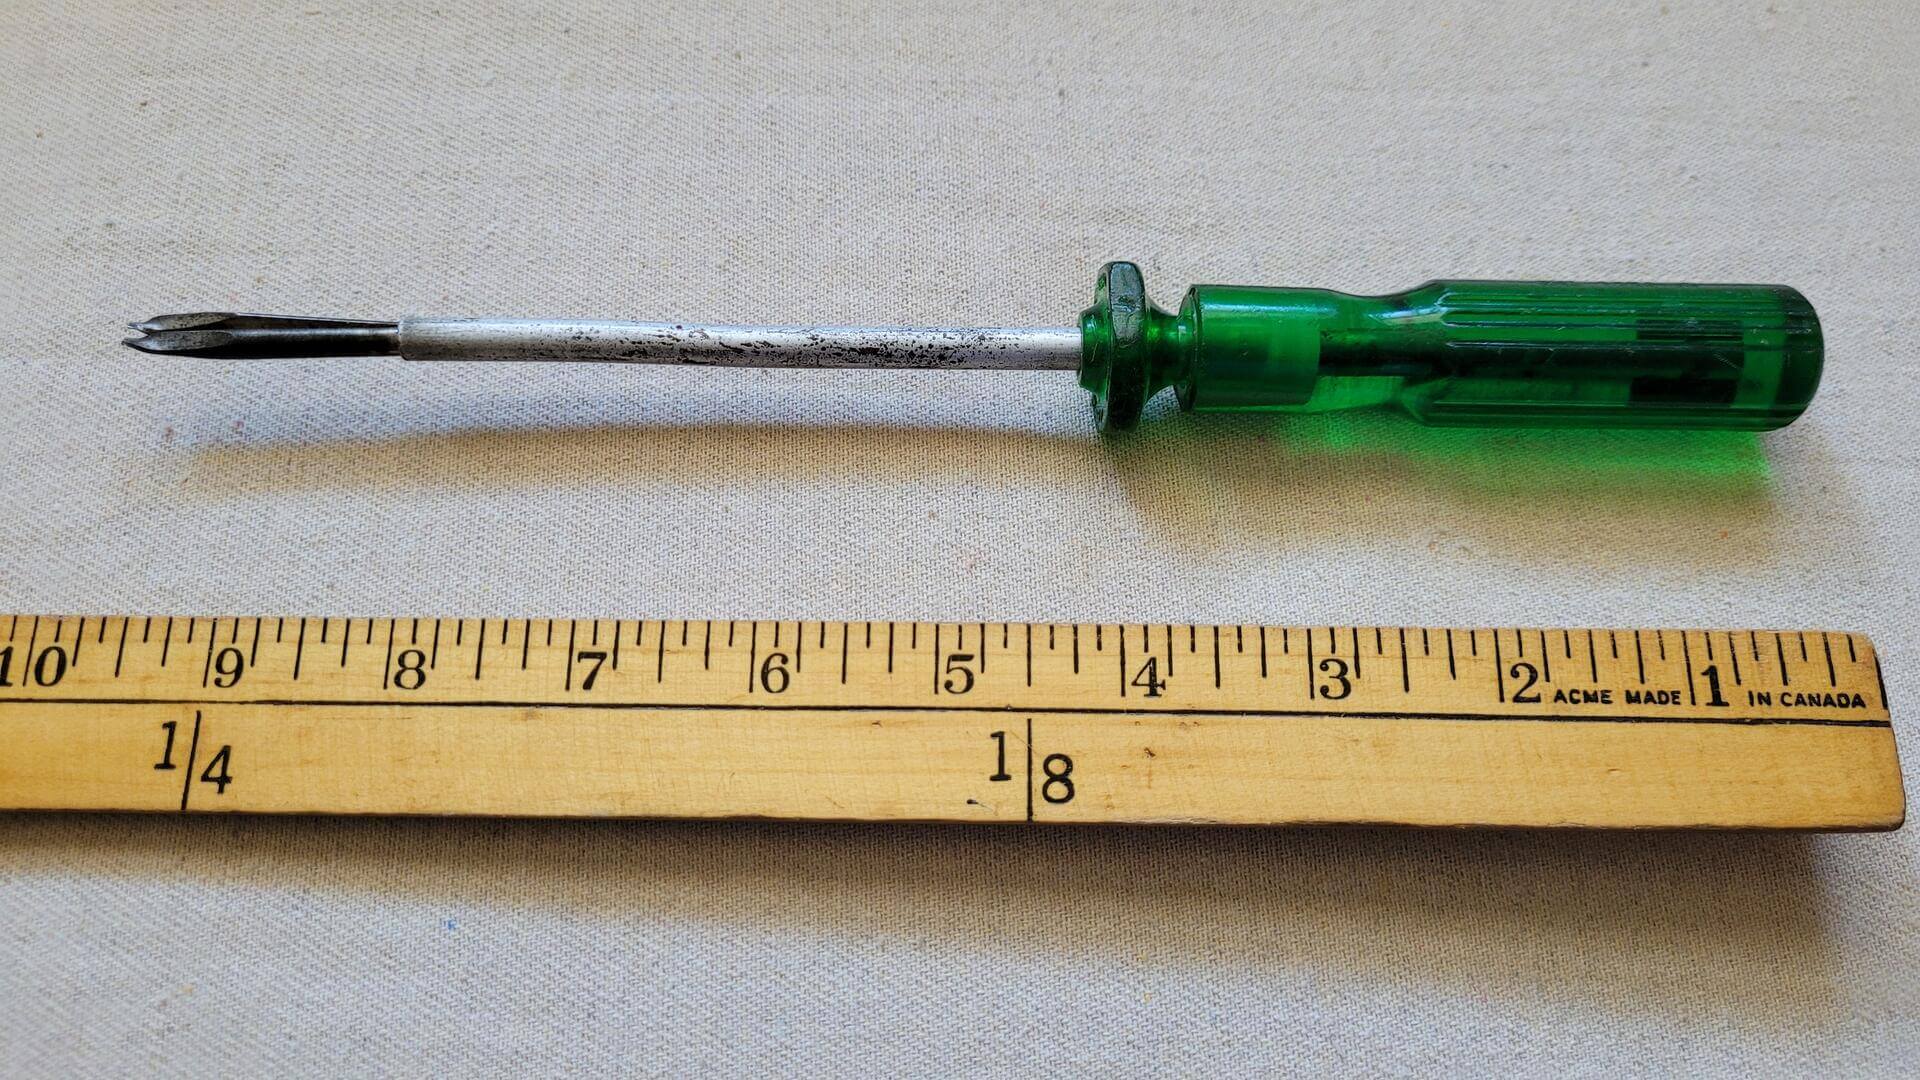 Rare vintage Quick-Wedge No. 1836 screw holding slot screwdriver 10 inches long and green handle. Antique Salt Lake City Kedman Company made in USA collectible hand tools